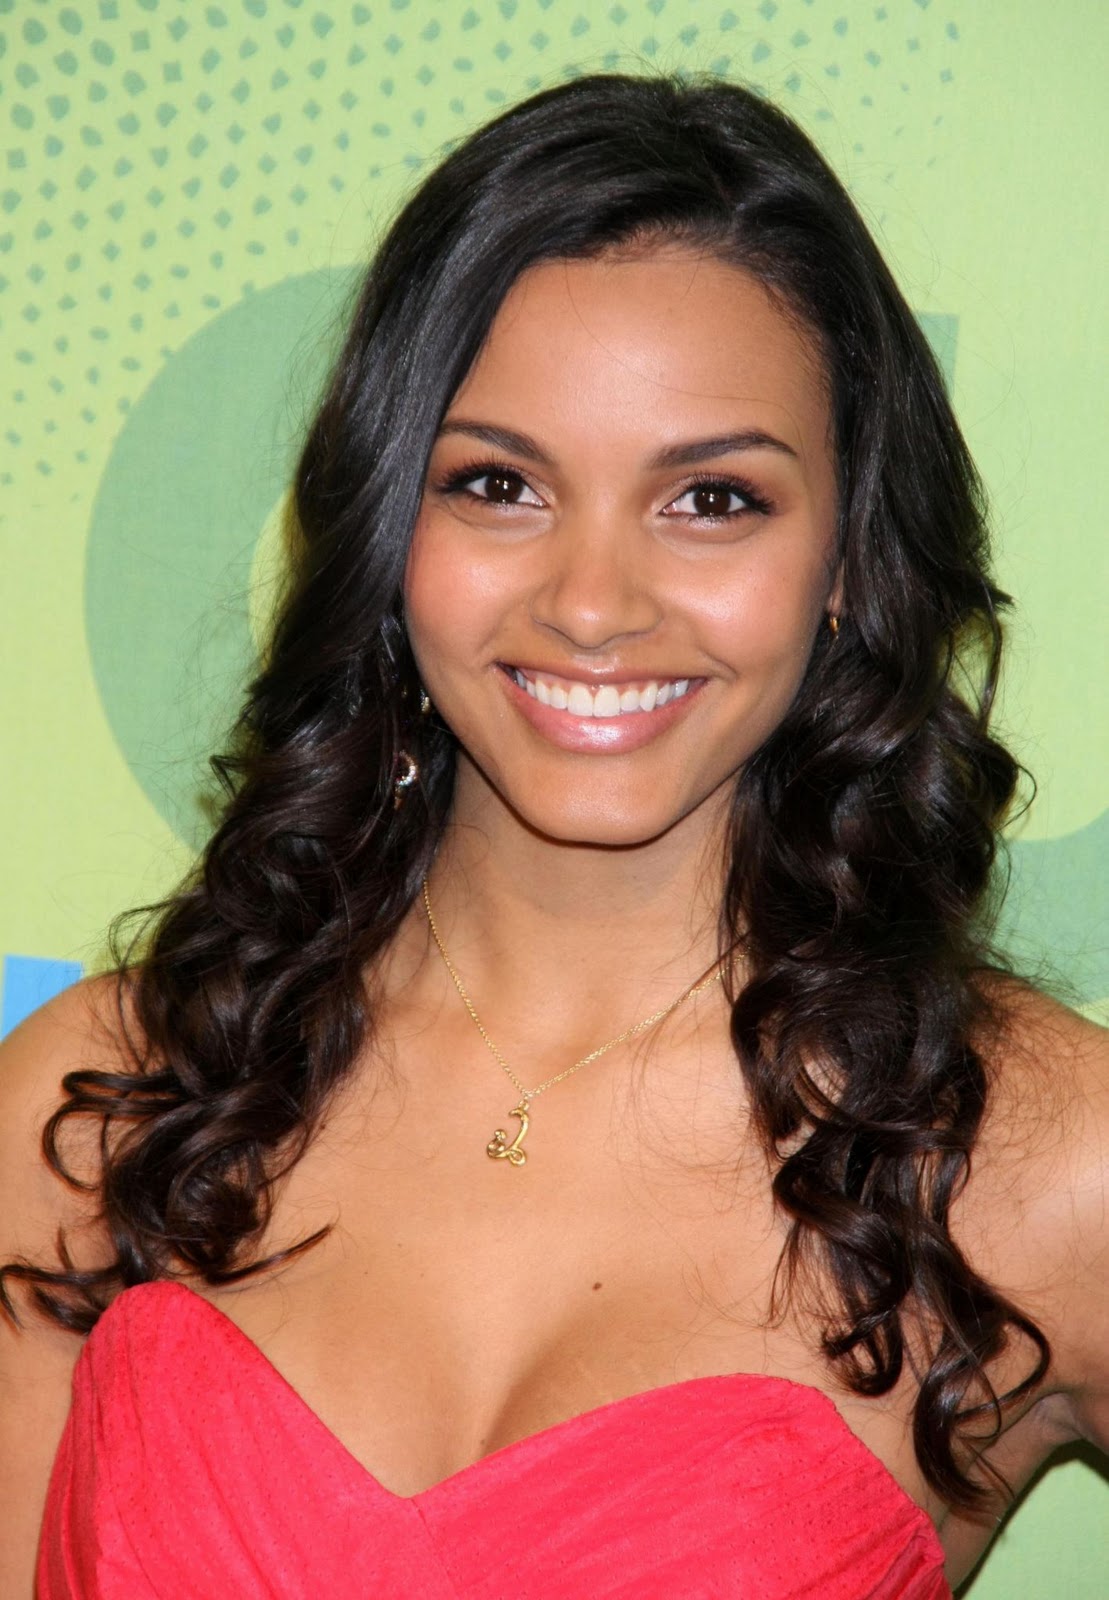 Jessica Lucas Hot Sexy Photo And Film List.